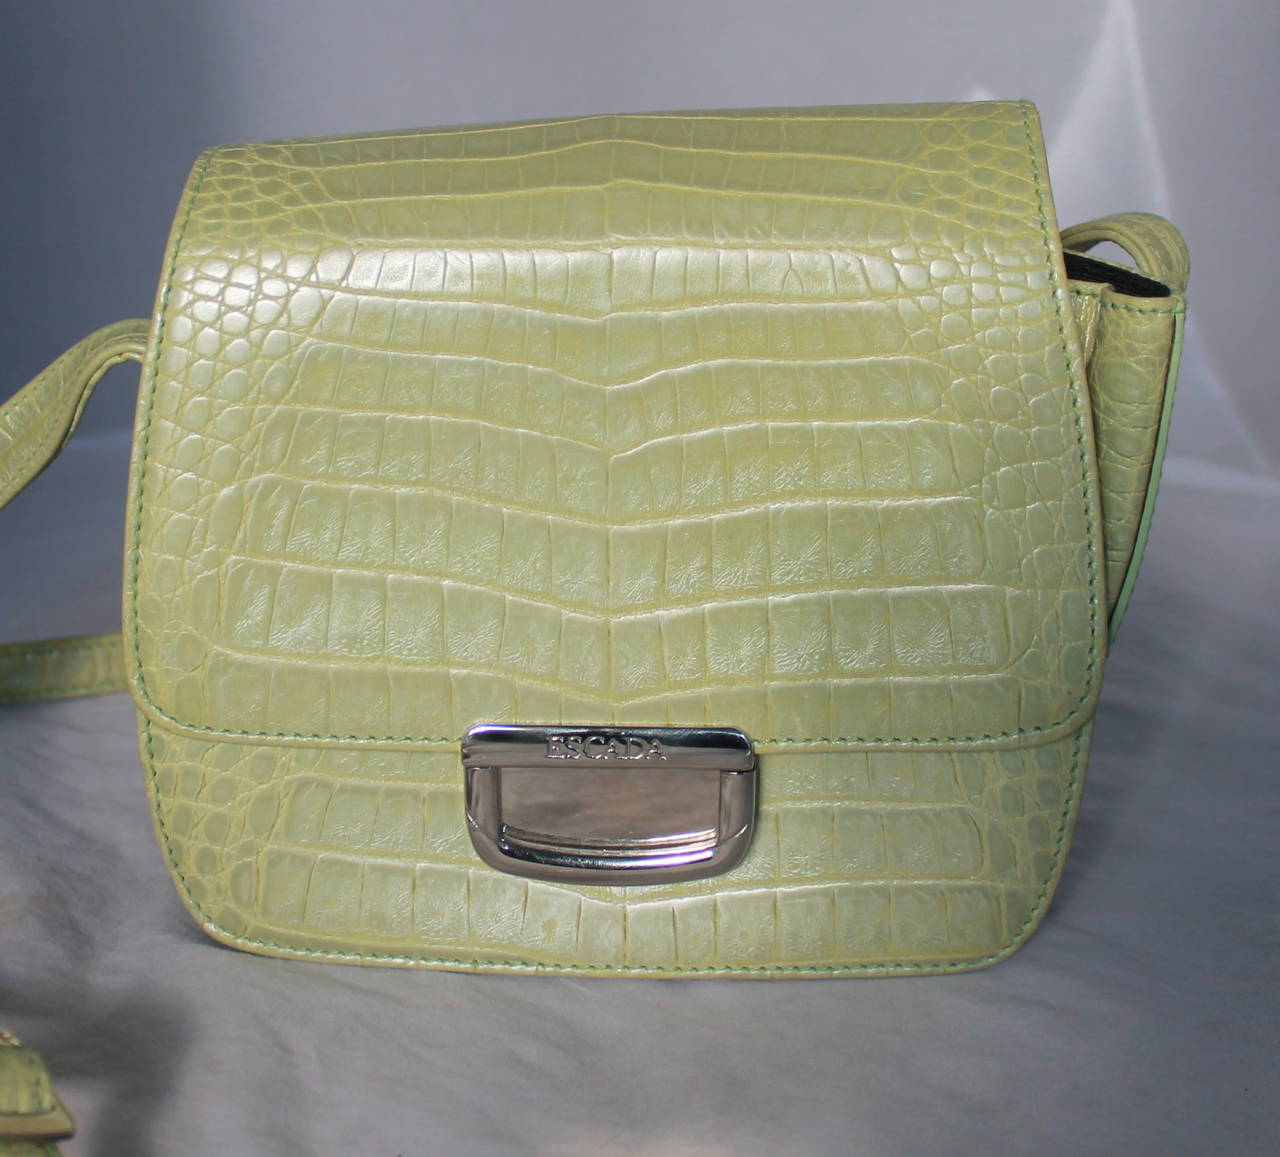 Escada Pearlized Green Croc Embossed Leather Handbag. This bag is in excellent condition and can be a short crossbody bag. 

Height- 5.5